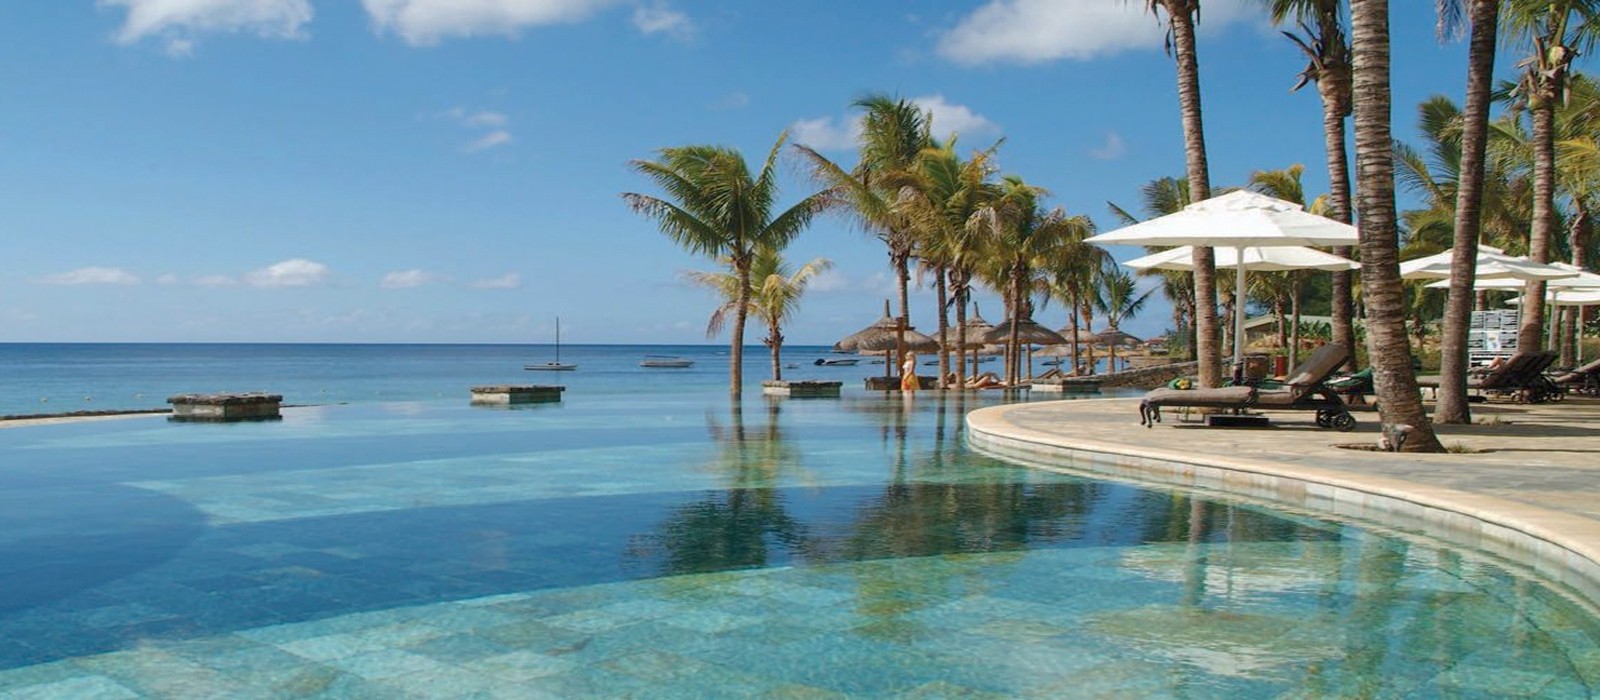 Le Meridien Ile Maurice - Luxury Mauritius Holiday Packages - header